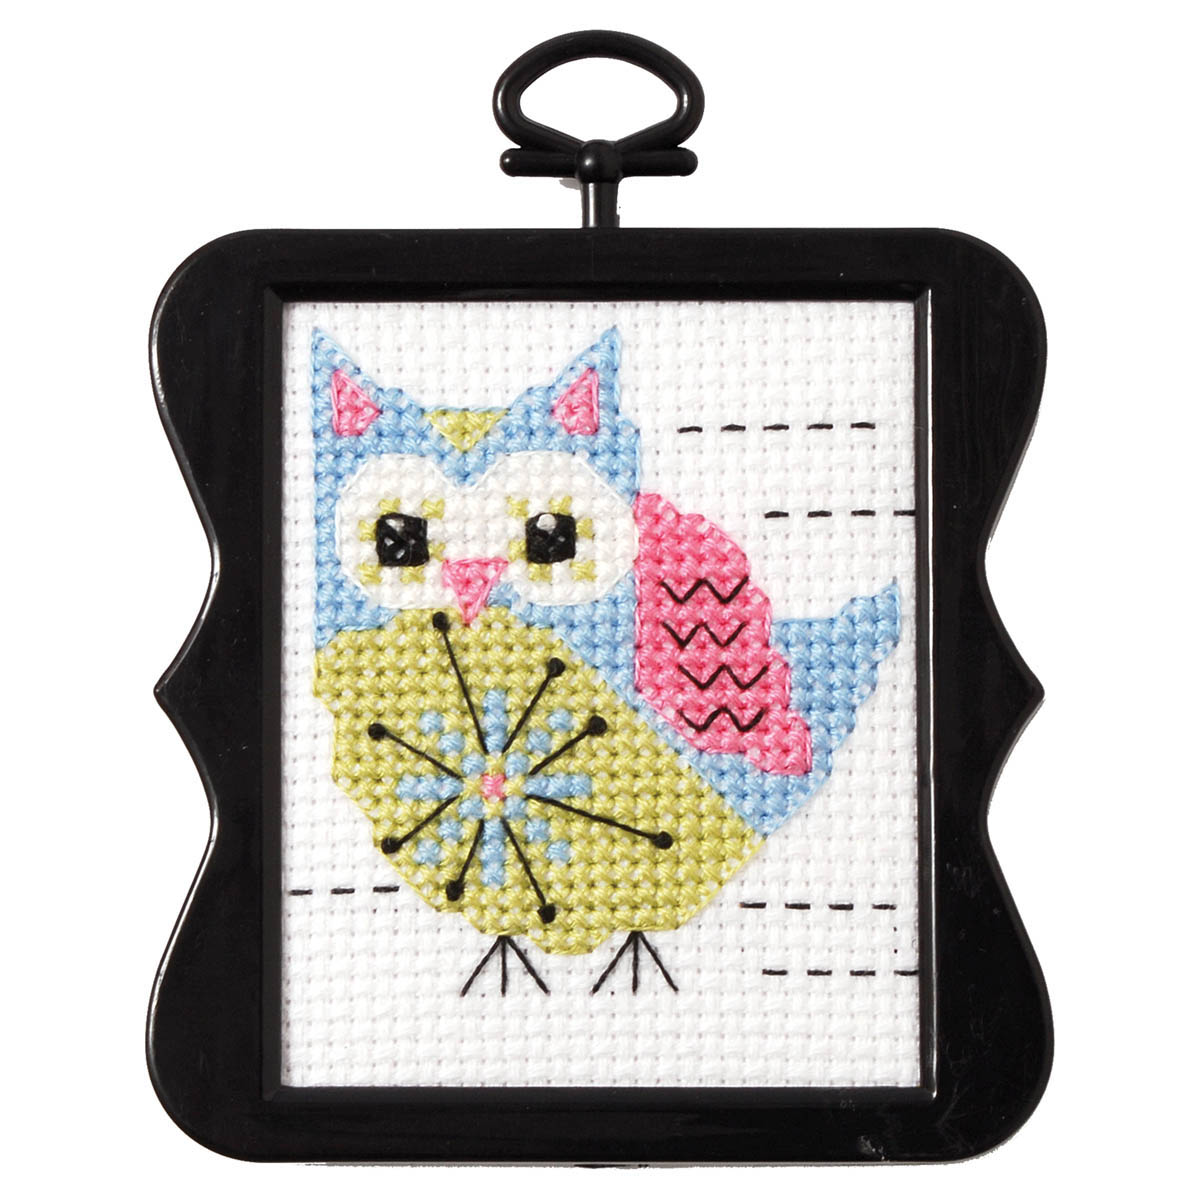 Simple cross stitch kit Funny Owls Easy counted pattern Beginners Embroidery